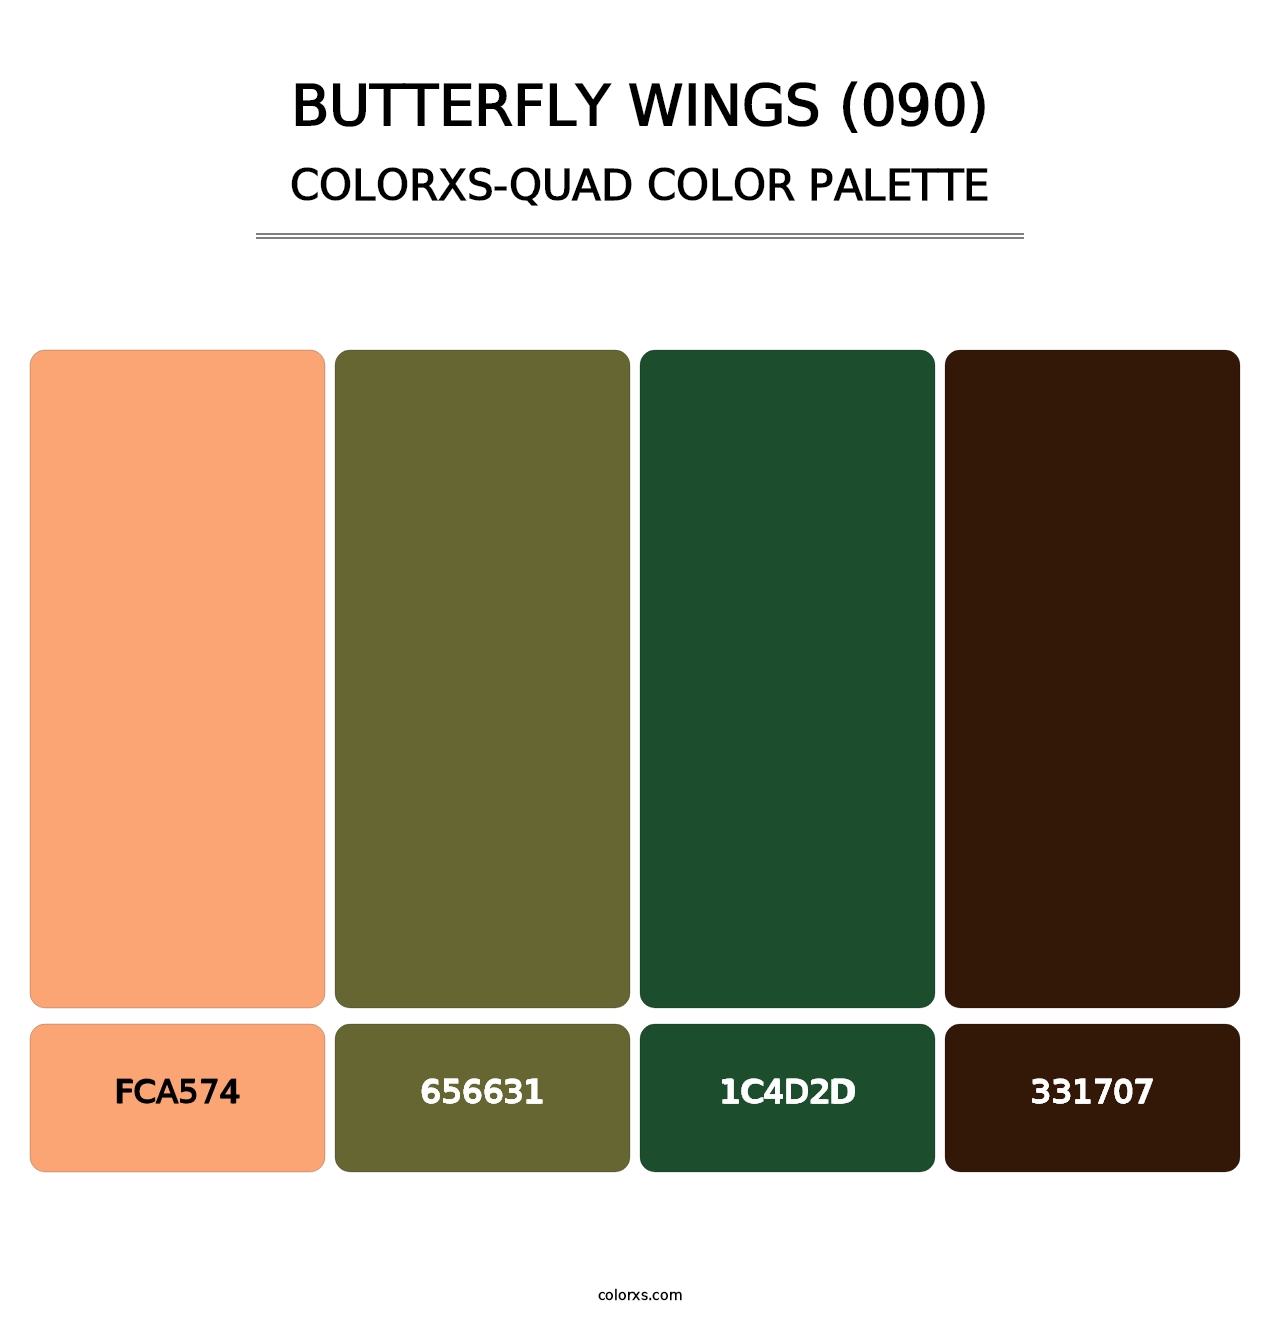 Butterfly Wings (090) - Colorxs Quad Palette